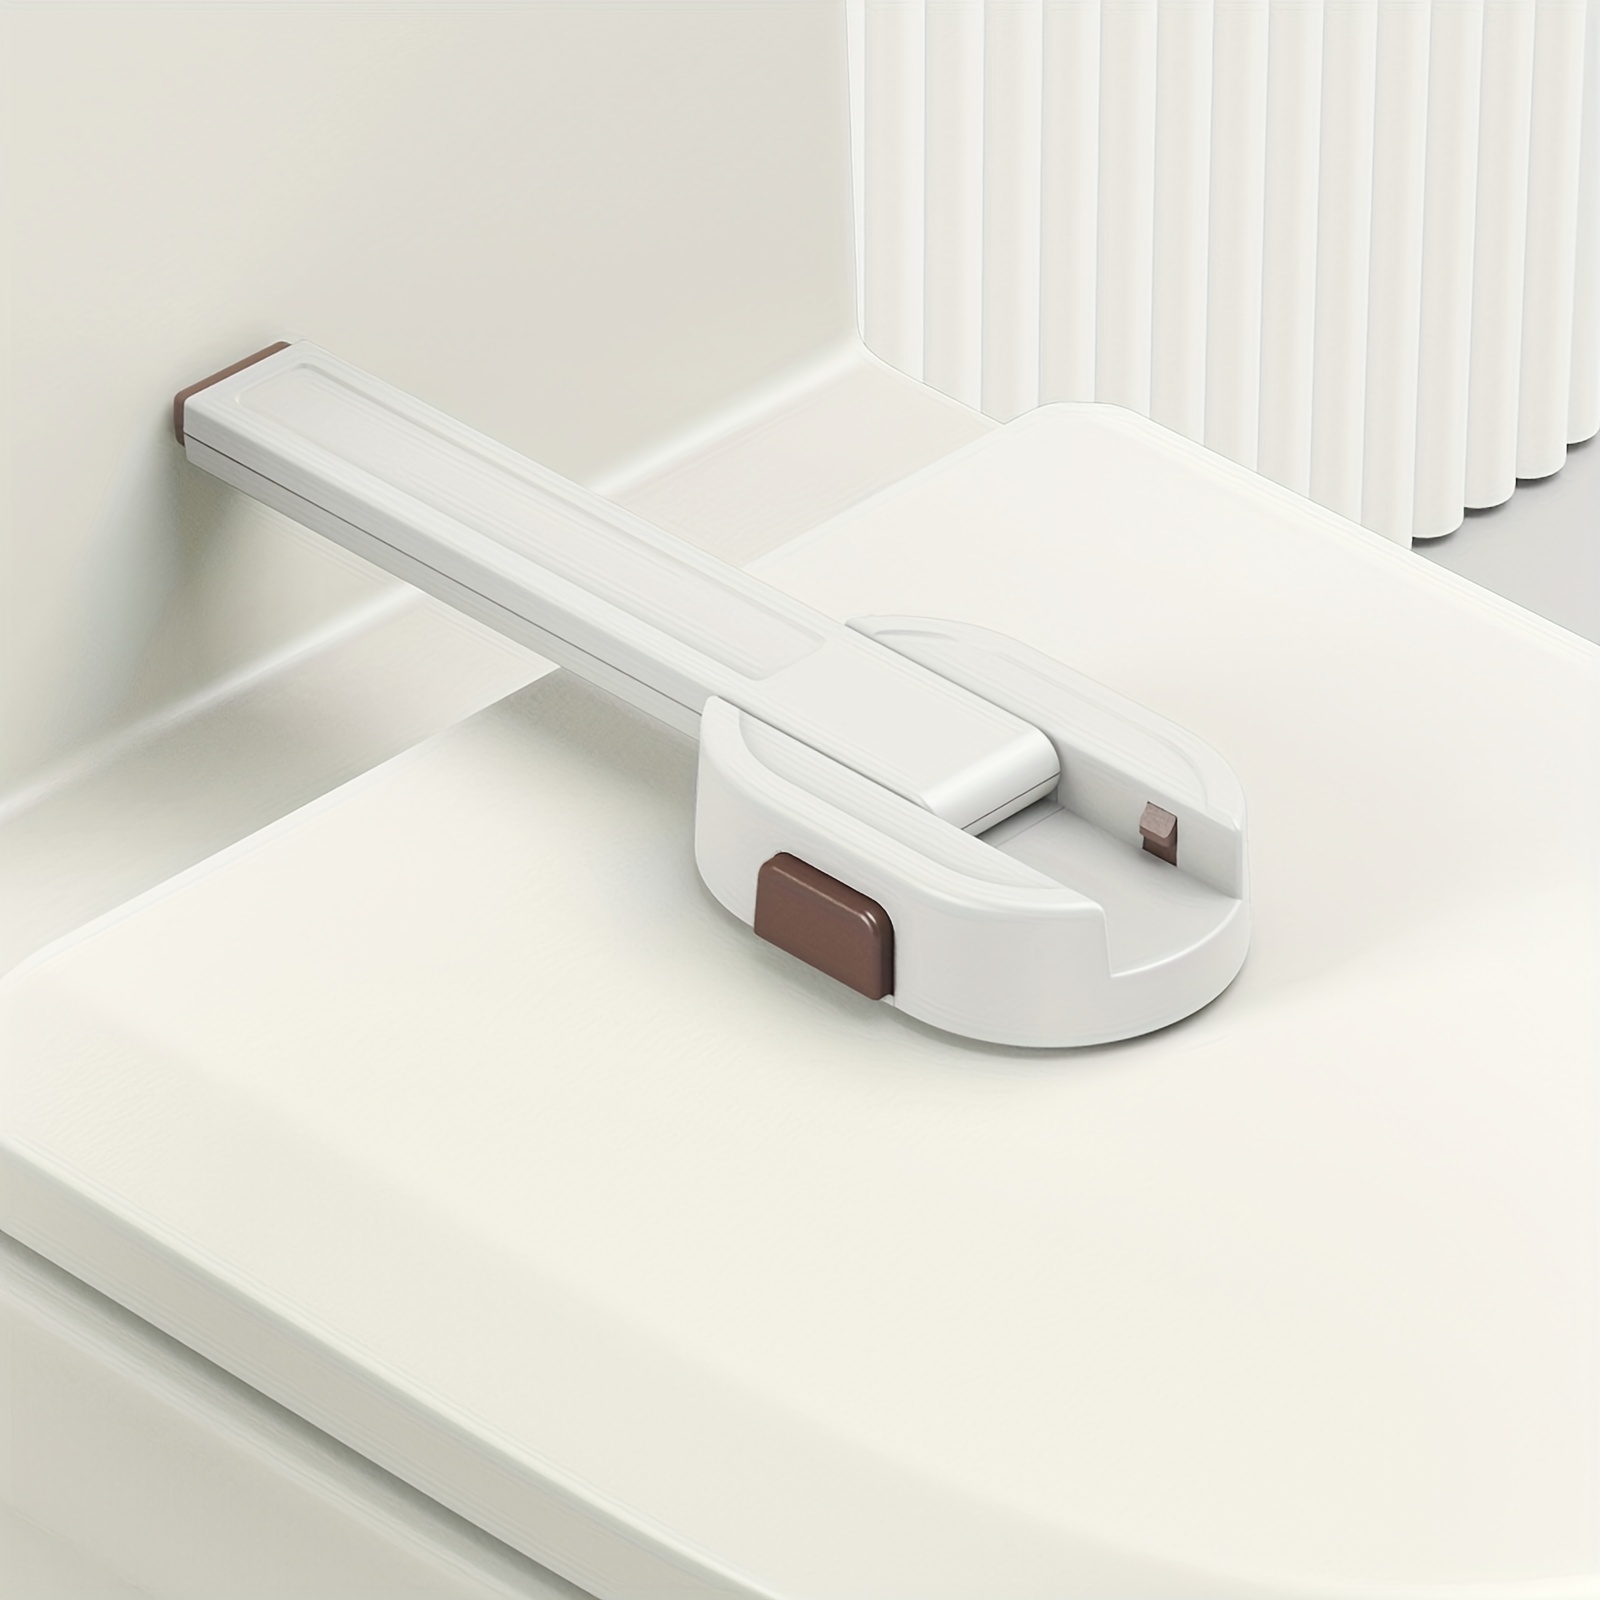 How to Install Toilet Seat Lock 